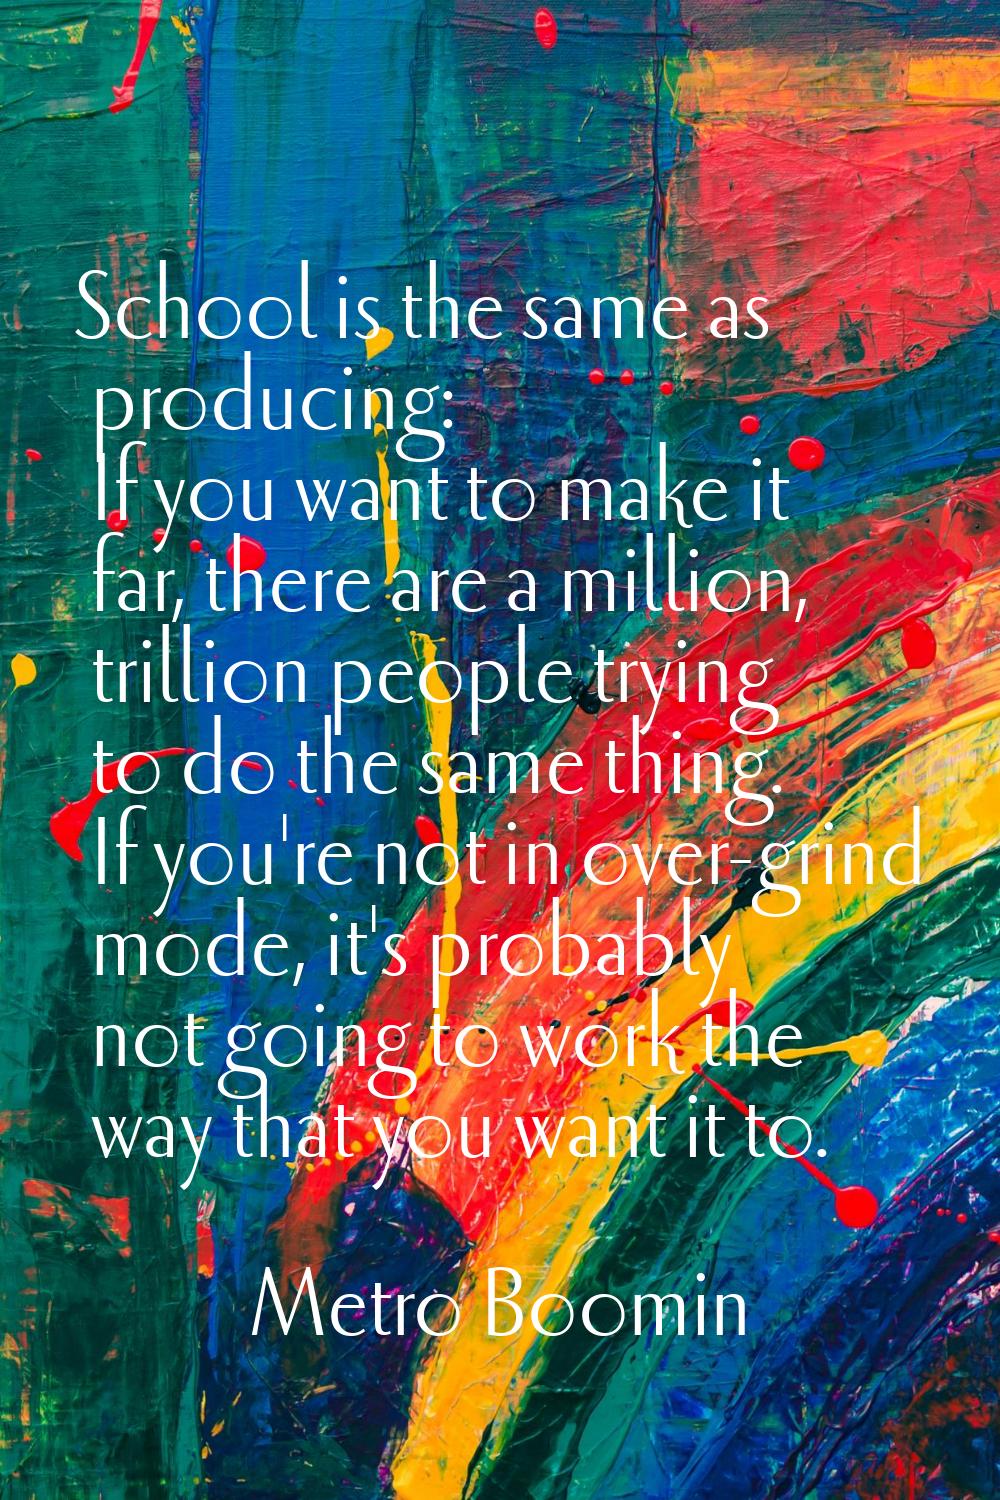 School is the same as producing: If you want to make it far, there are a million, trillion people t